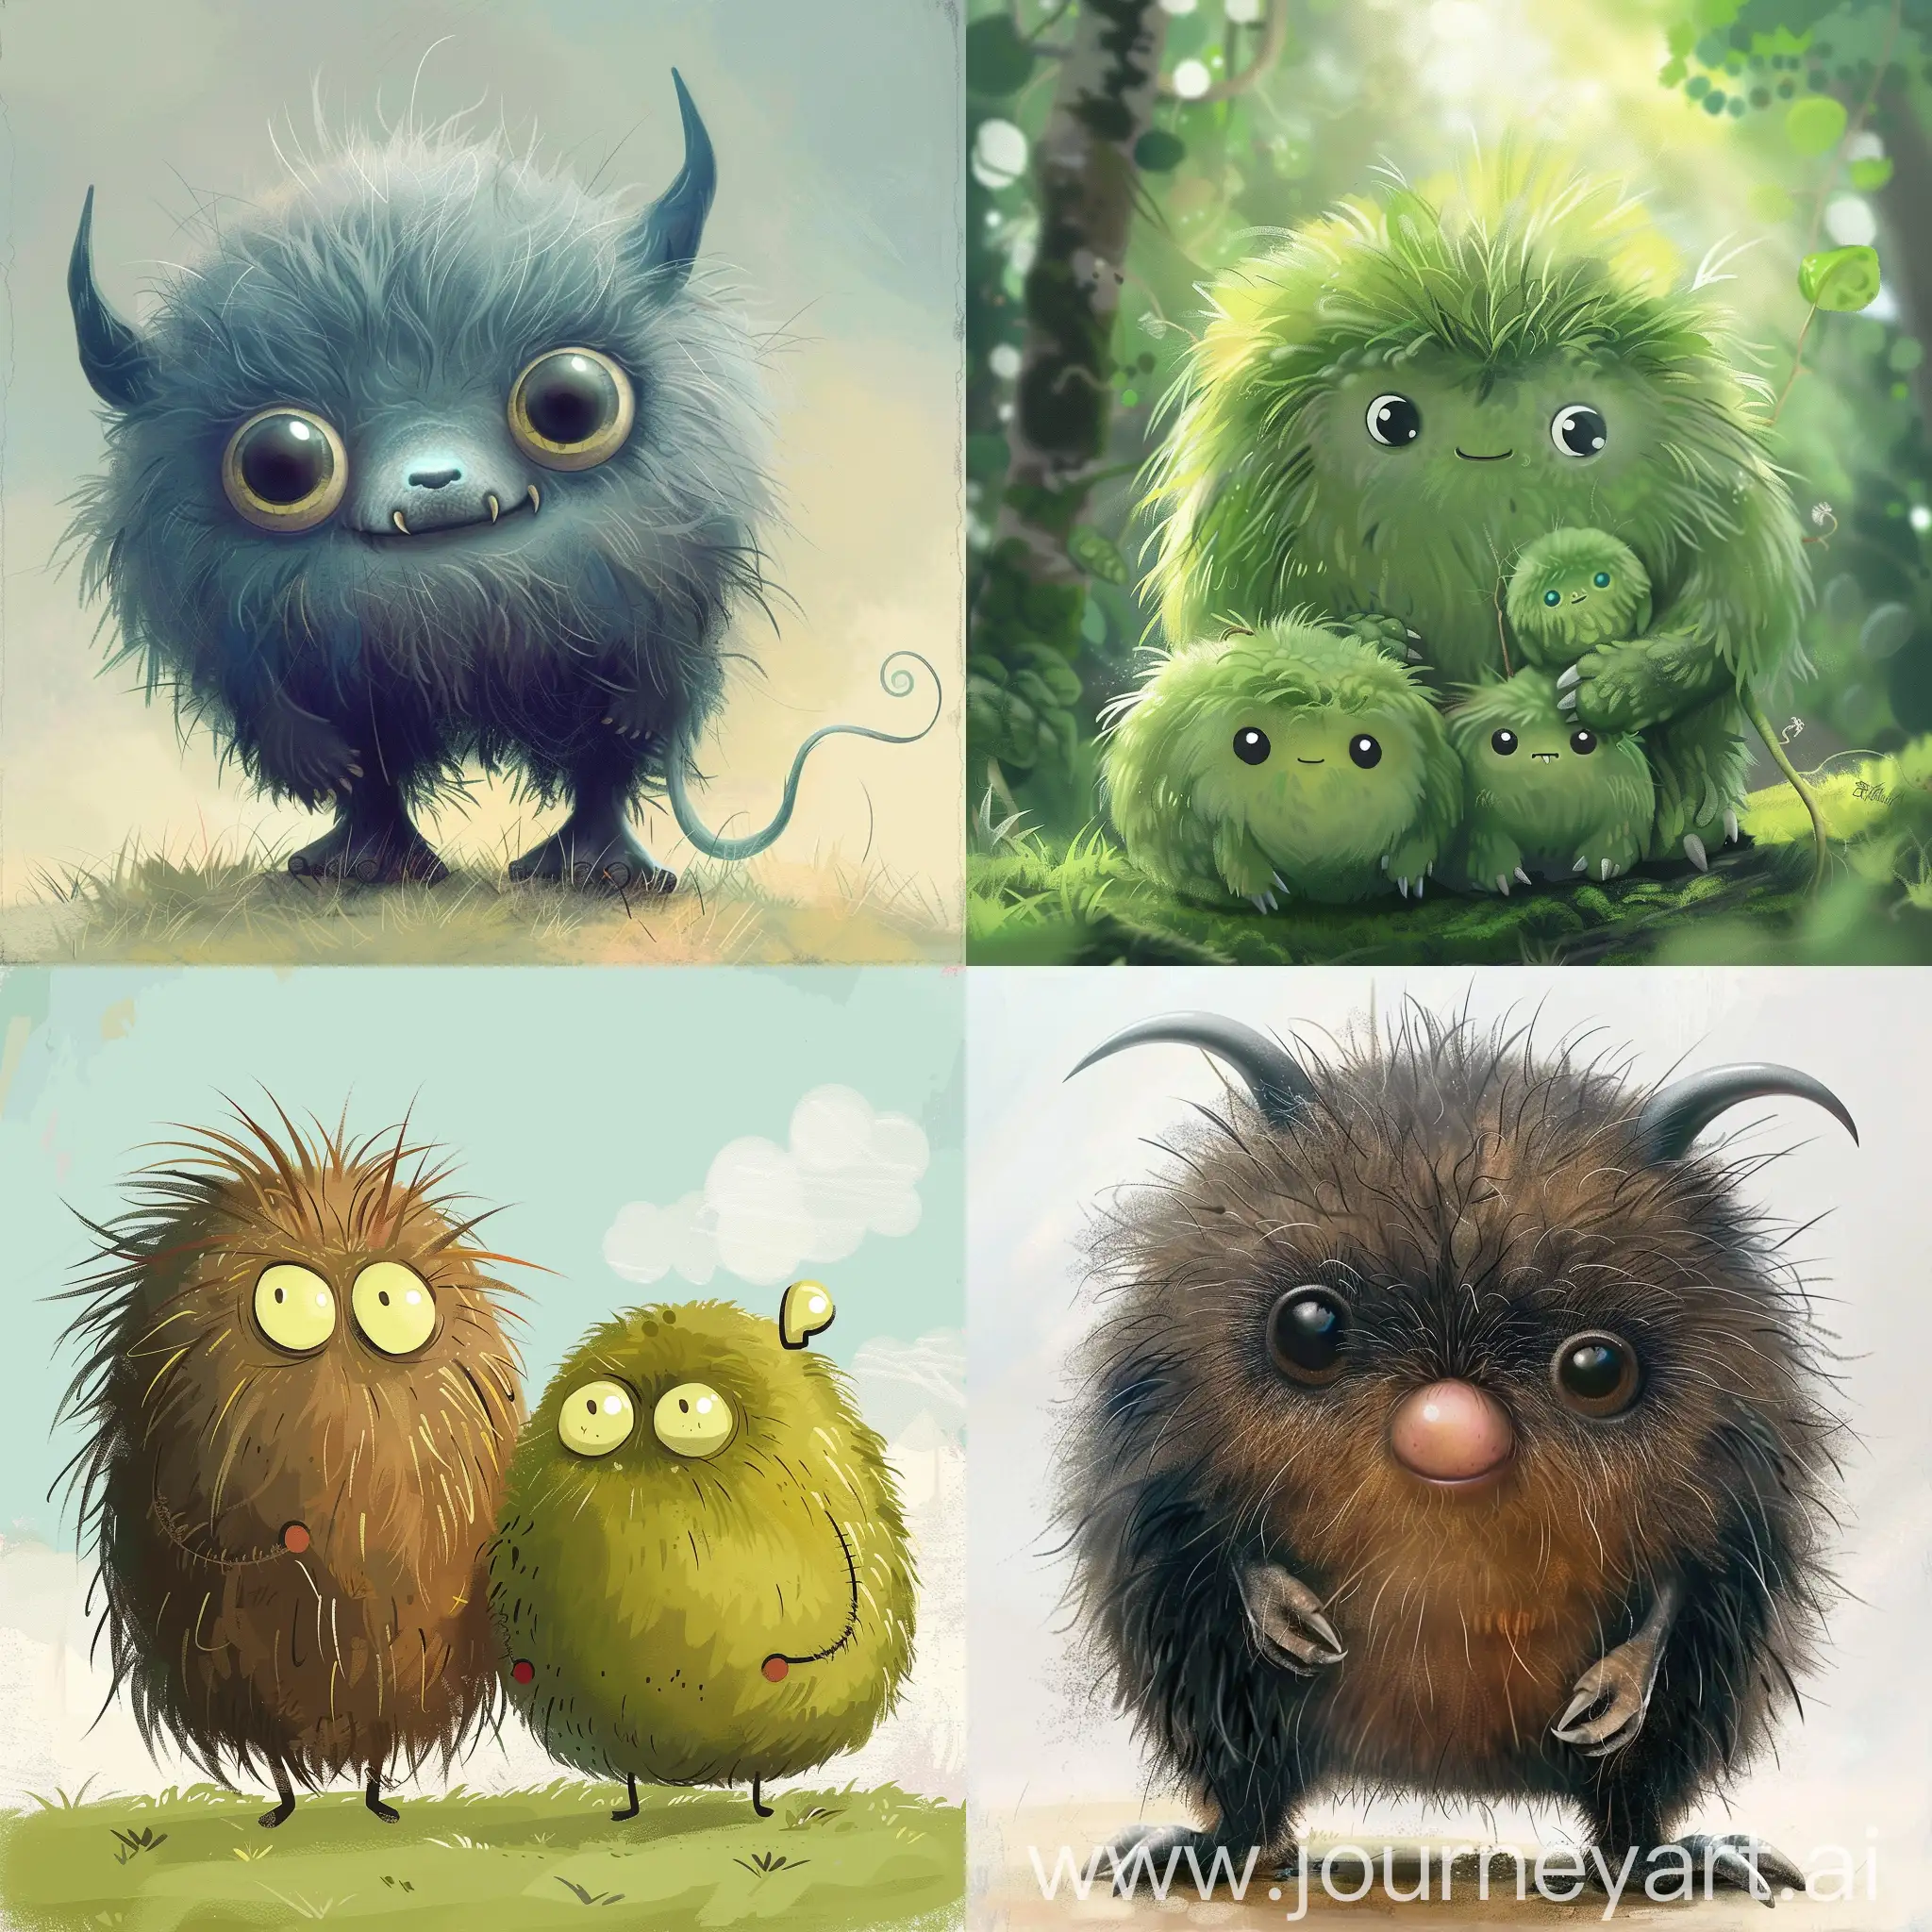 Adorable-Kiwaii-Monsters-in-Playful-Interaction